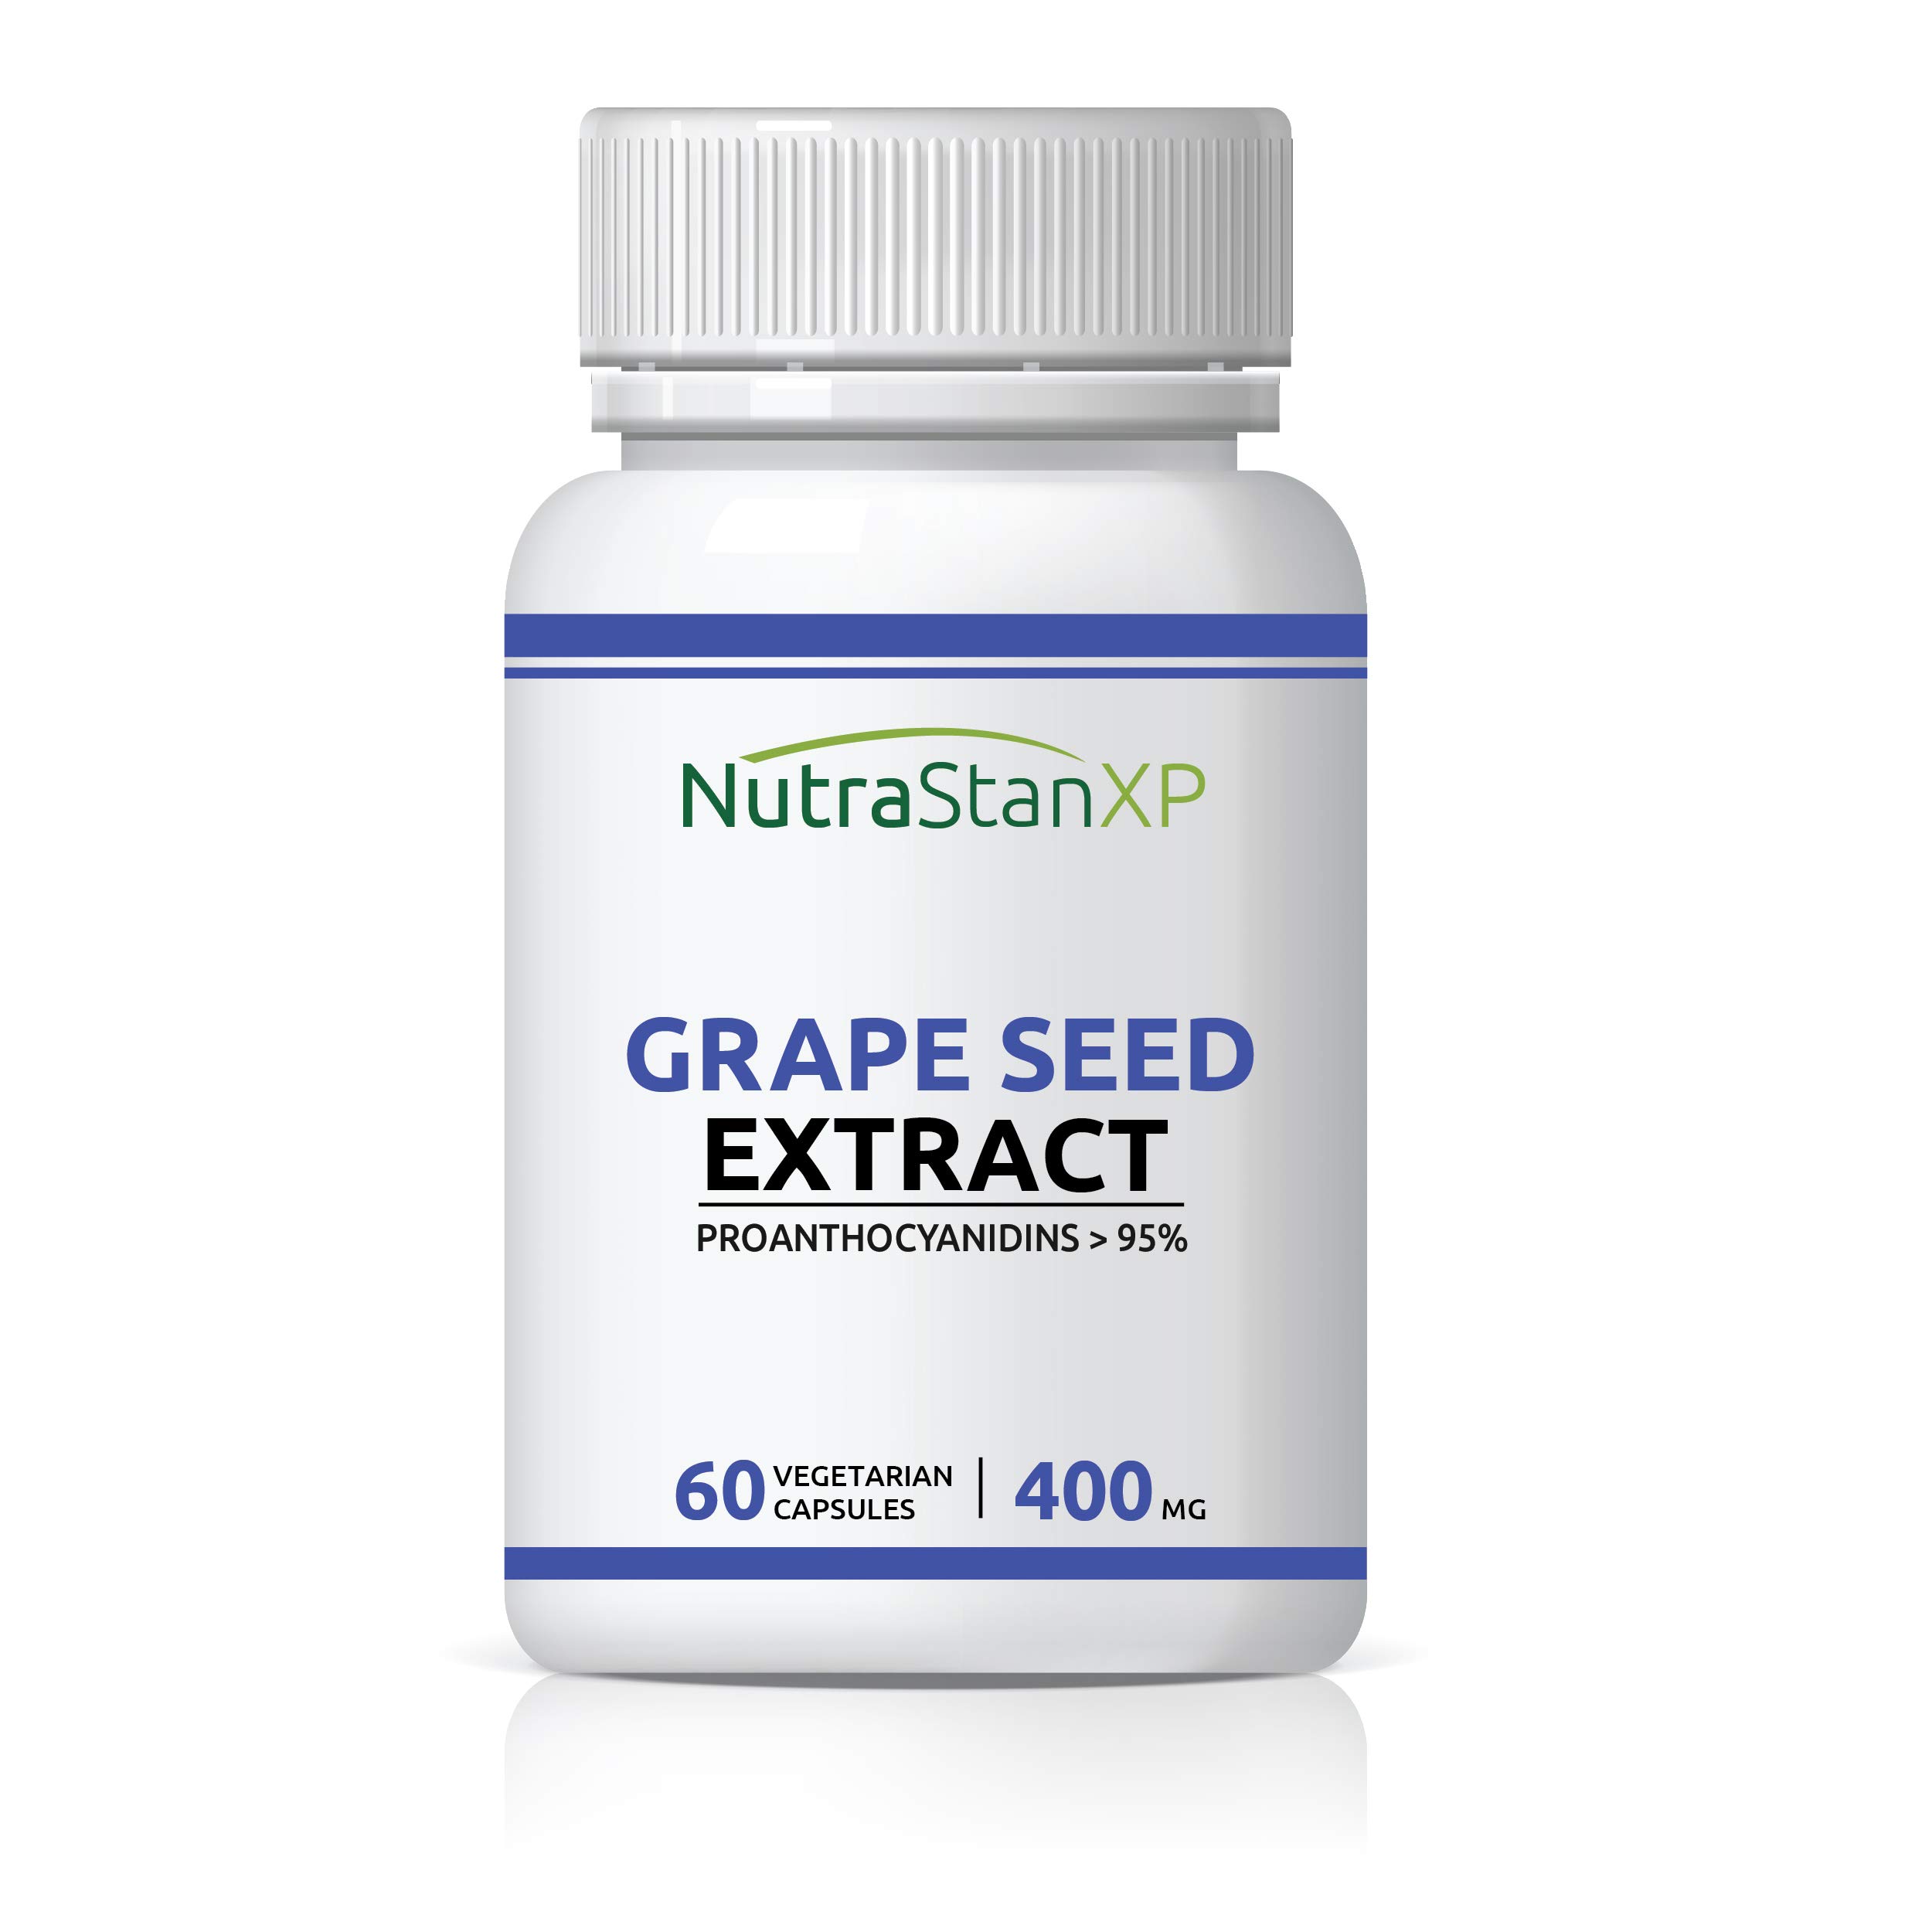 NutrastanXP Grape Seed Extract (Proanthocyanidins  95%) Antioxidant, 400 mg - 60 Vegetarian Capsules